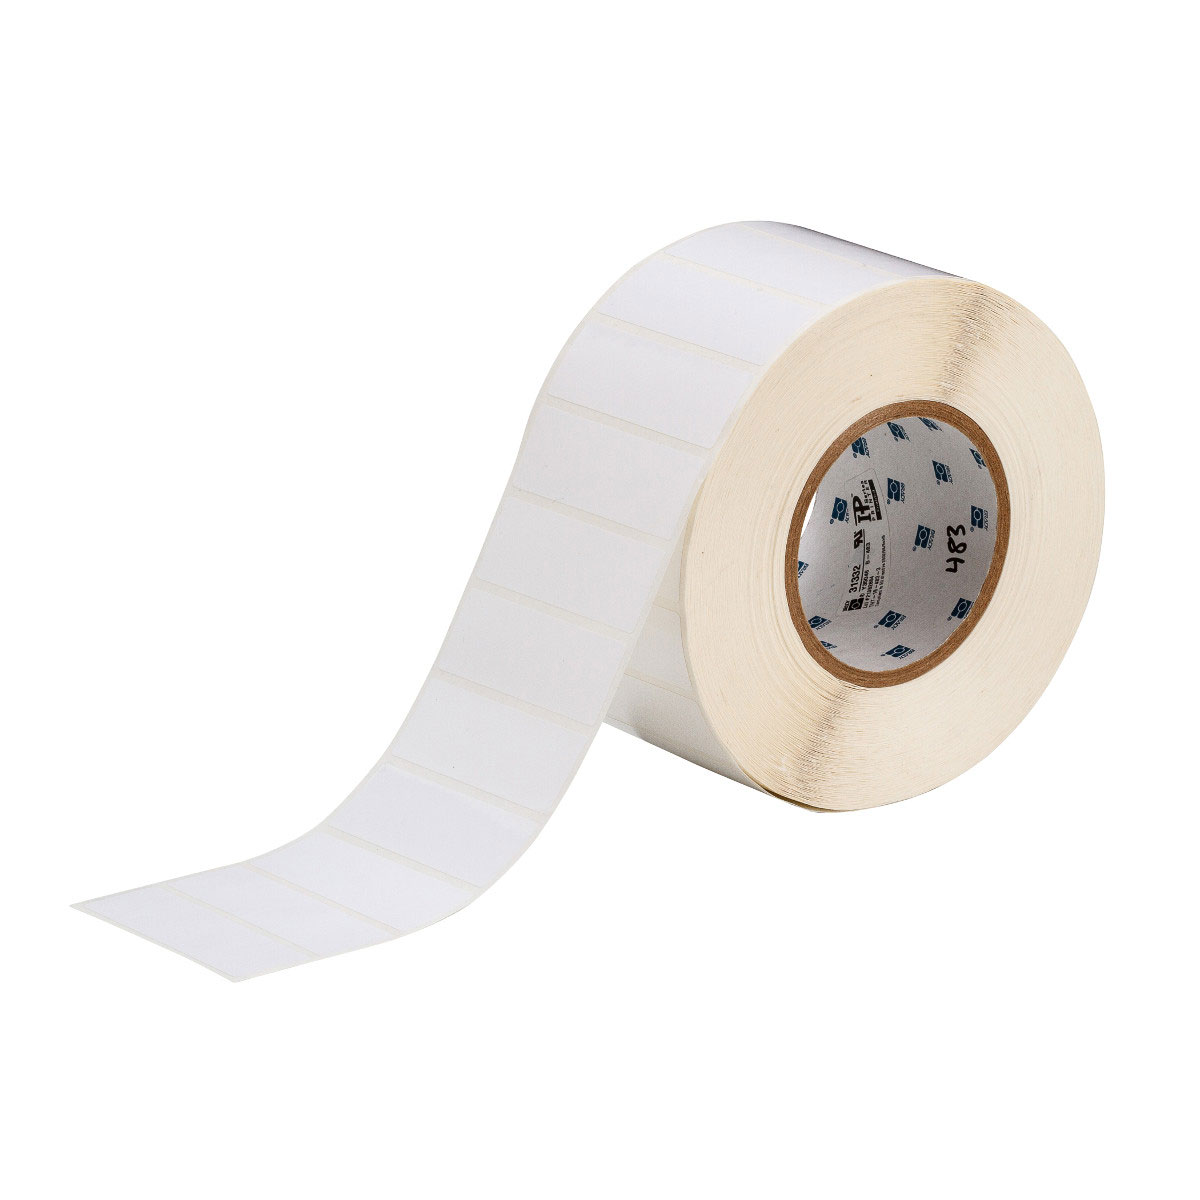 NEW Brady B-483 Thermal Roll Labels PTL-8-483 0.5 in x 50 ft White